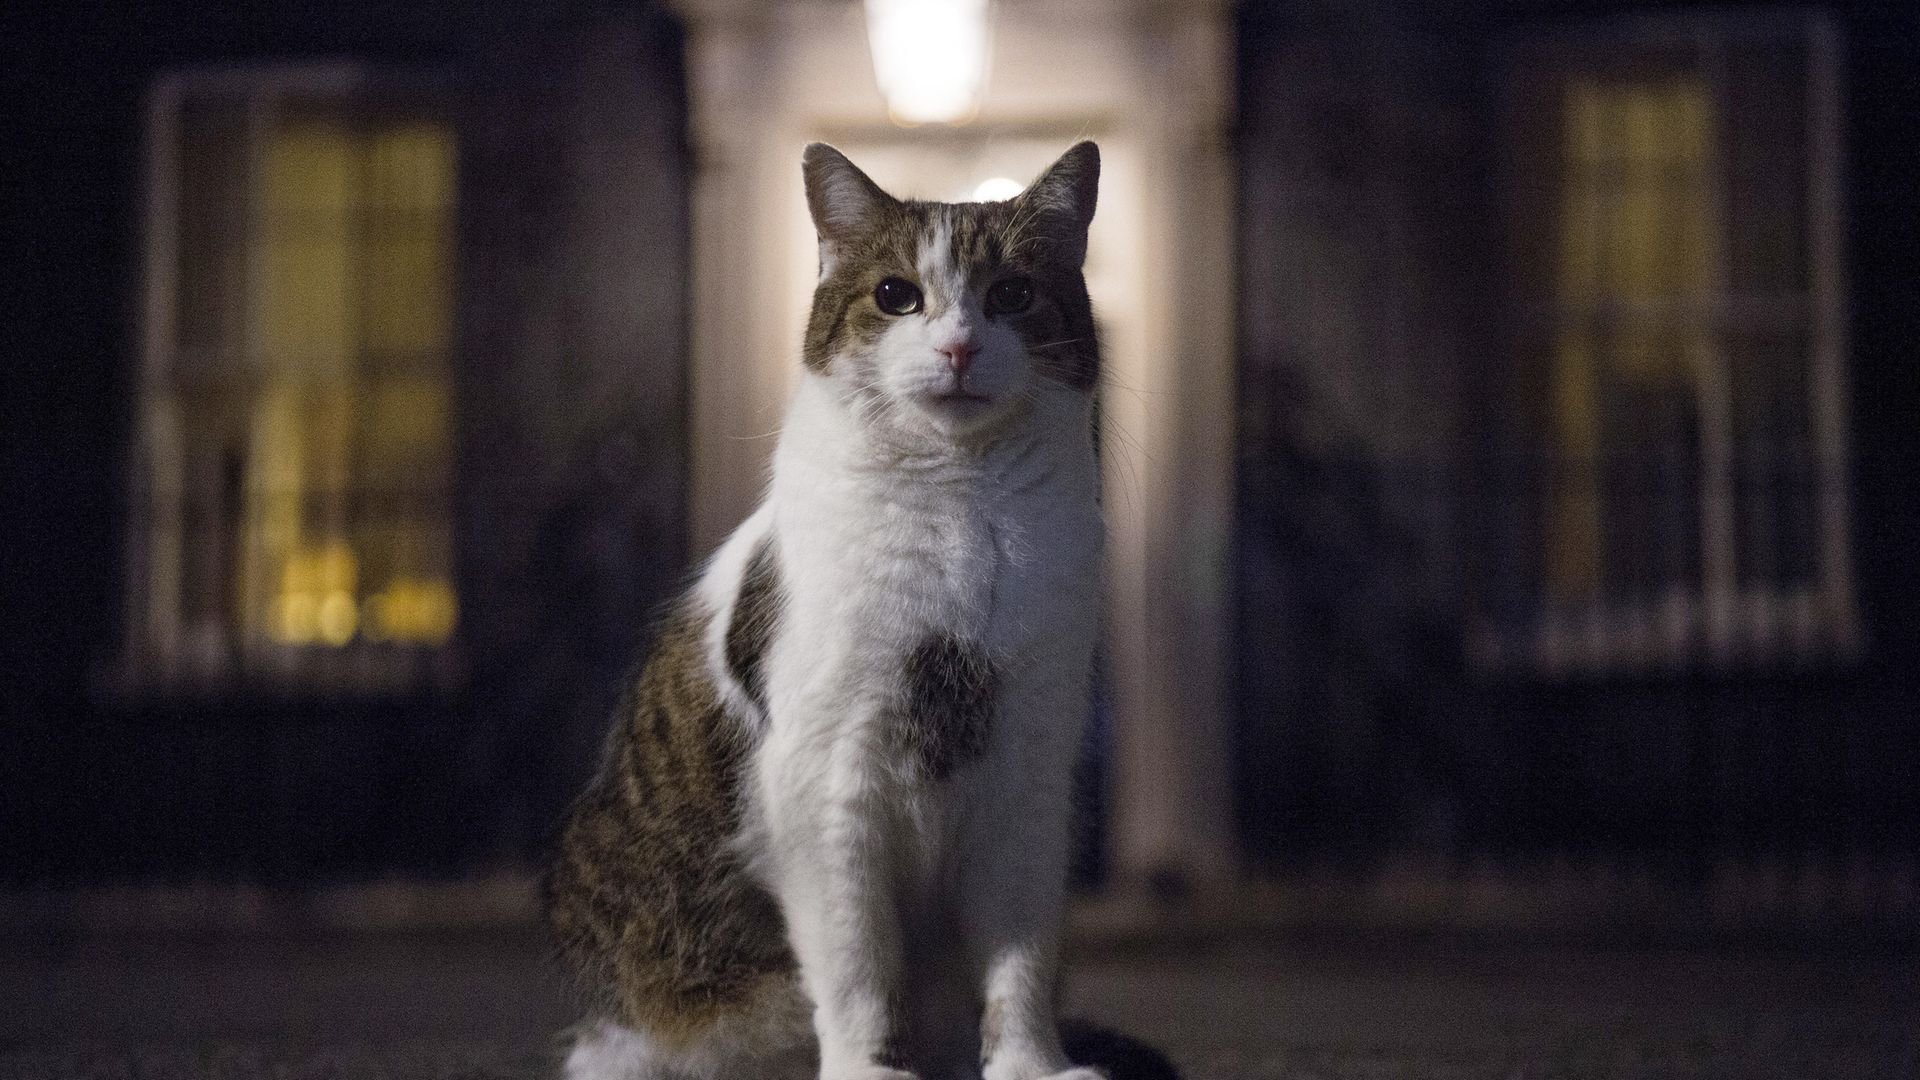 Larry the Downing Street Cat in Downing Street - Credit: PA